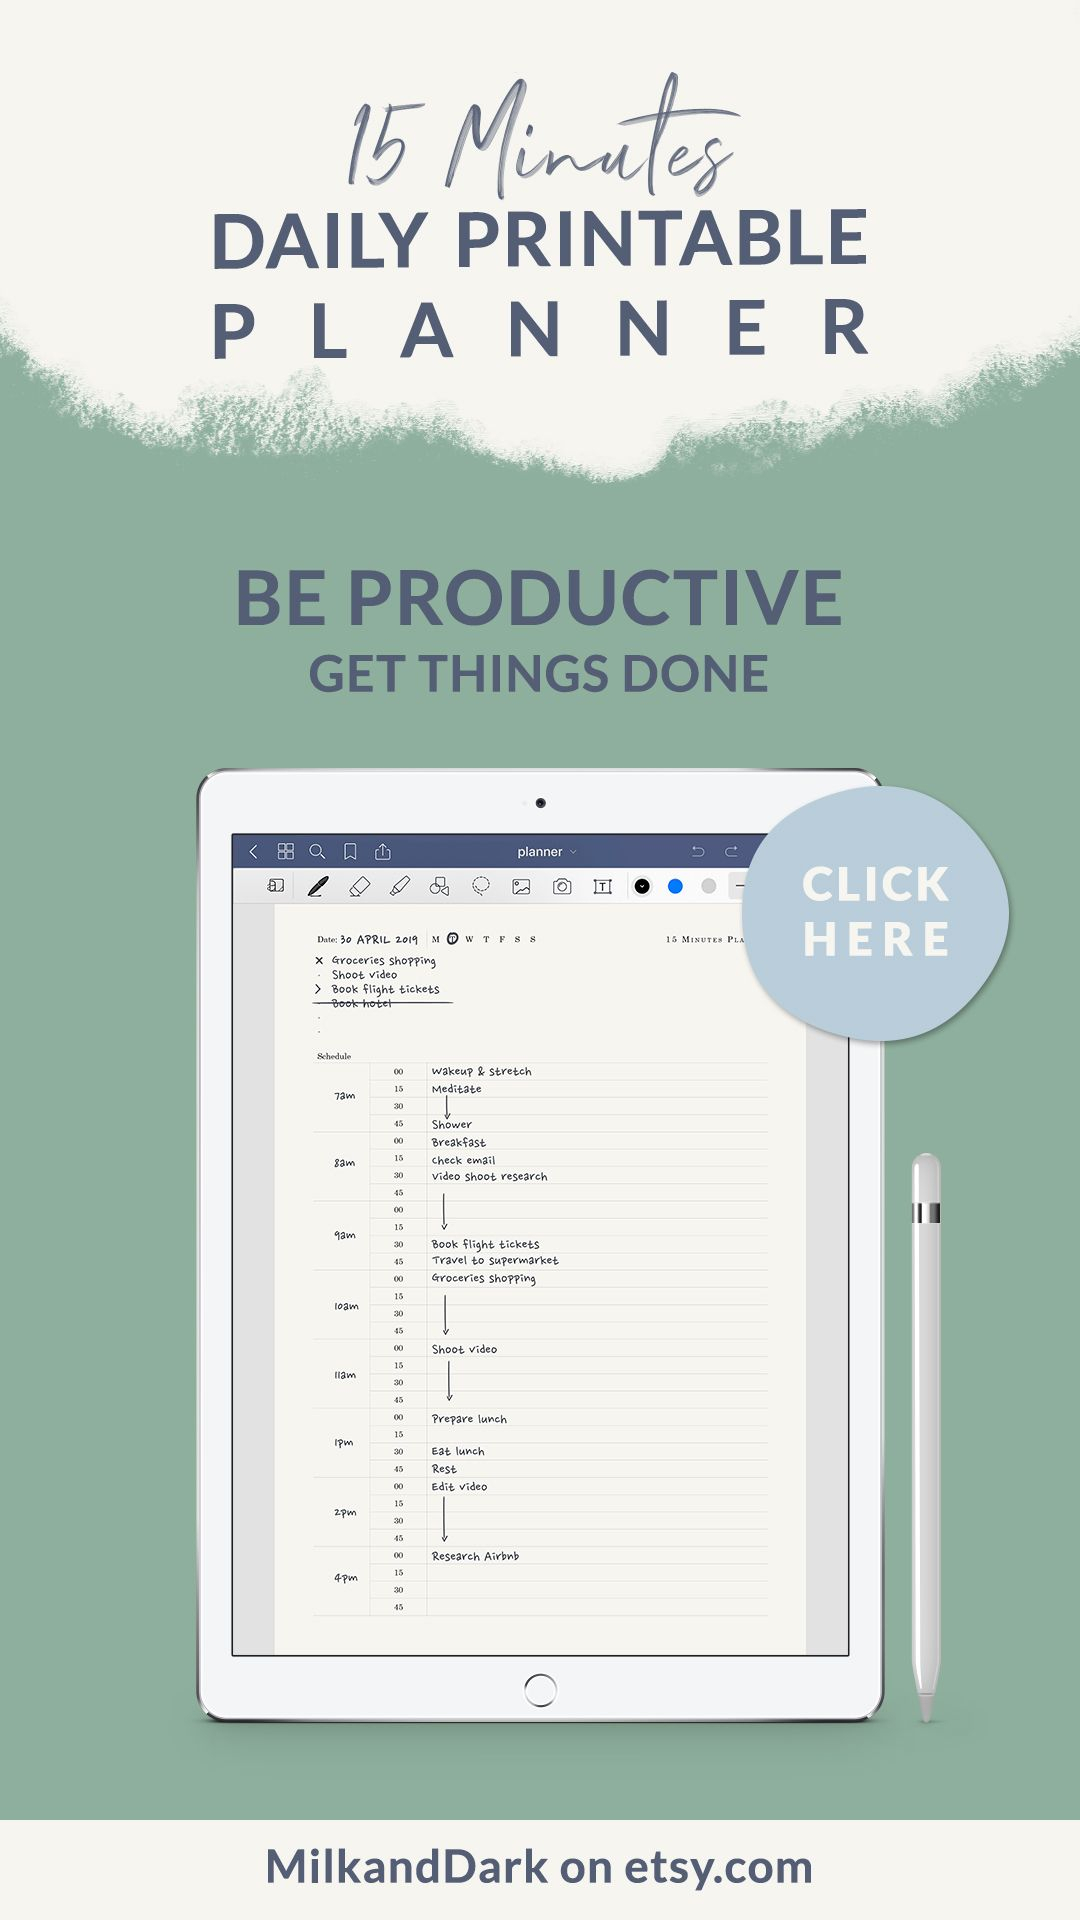 Daily Schedule Planner Printable | 15 Minutes Tracker | To in Planner With 15 Minute Time Slots